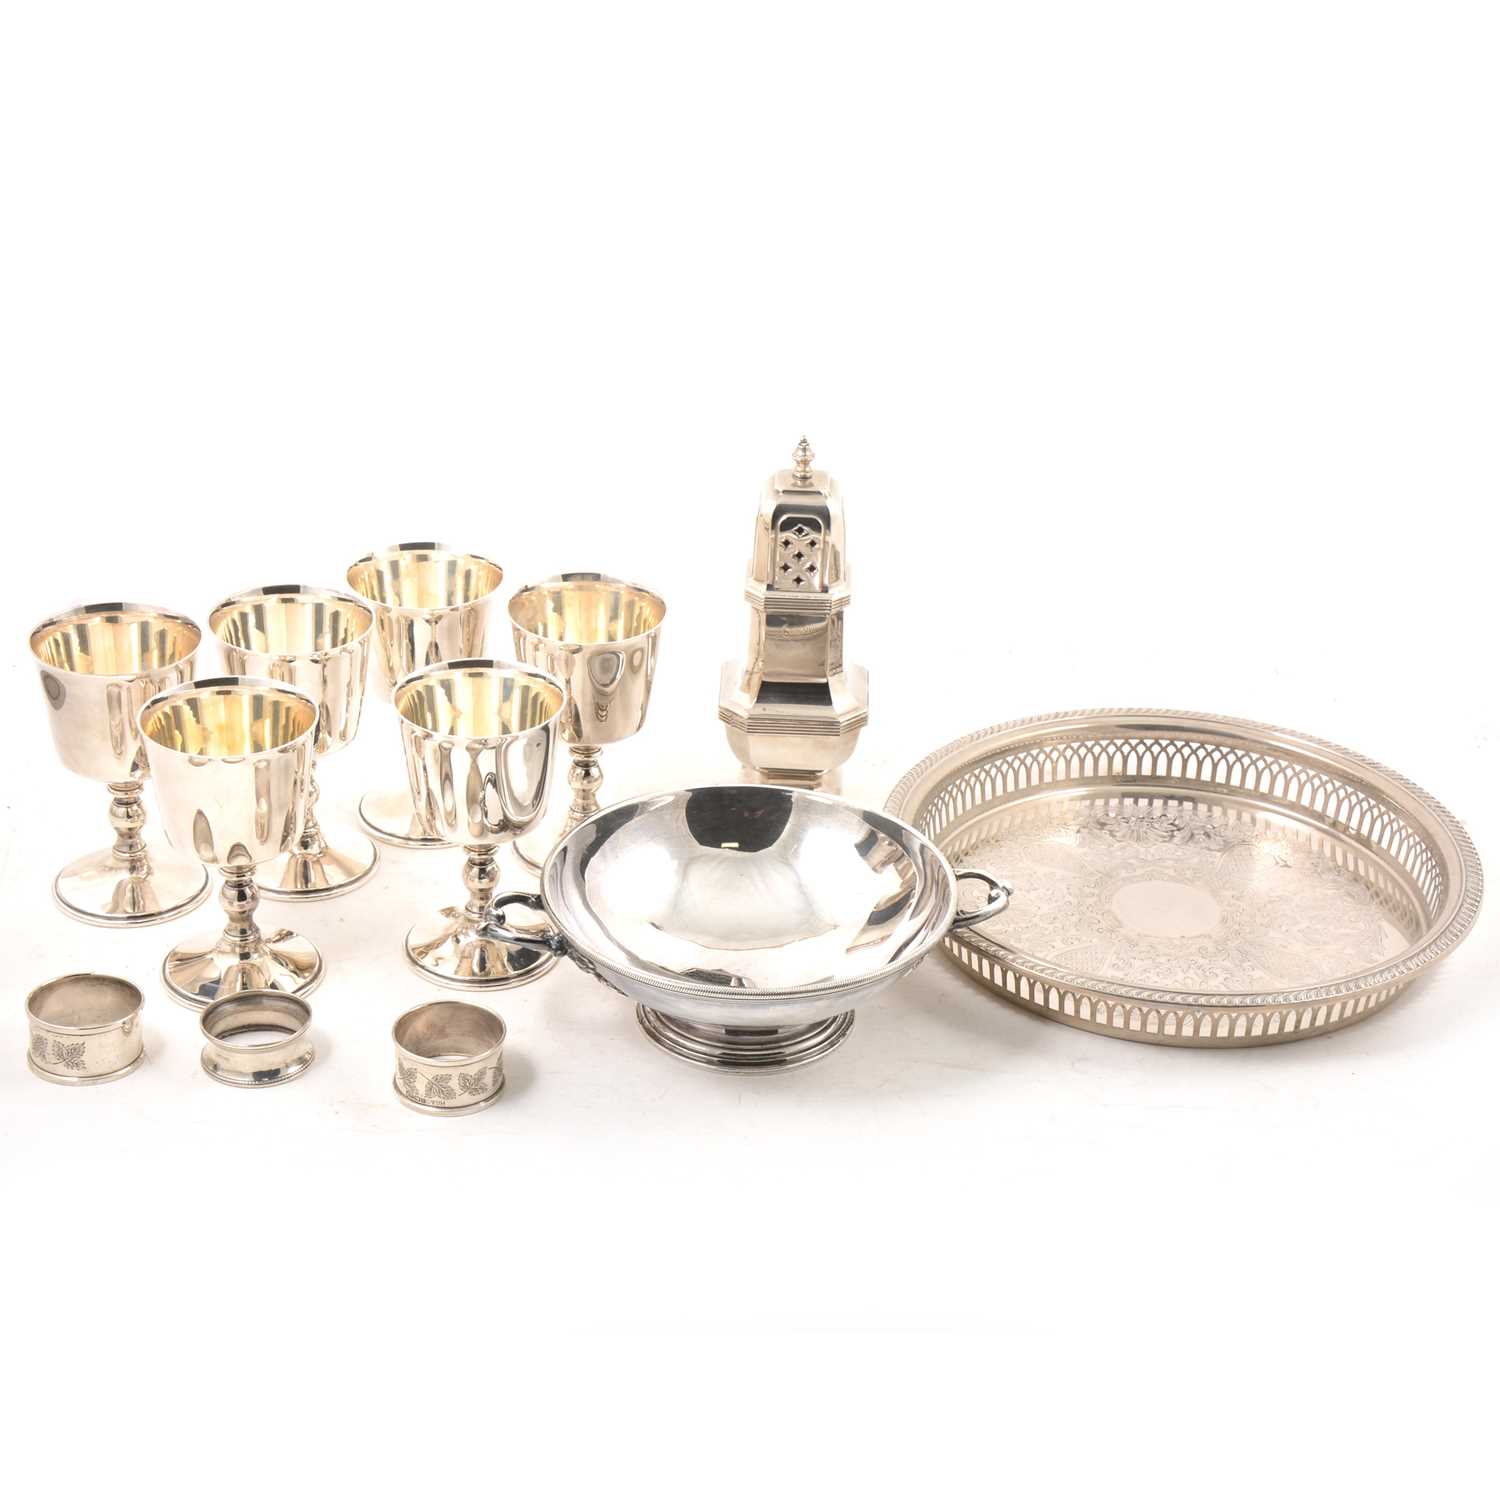 Lot 132 - A small collection of silver napkin rings and electroplated wares.